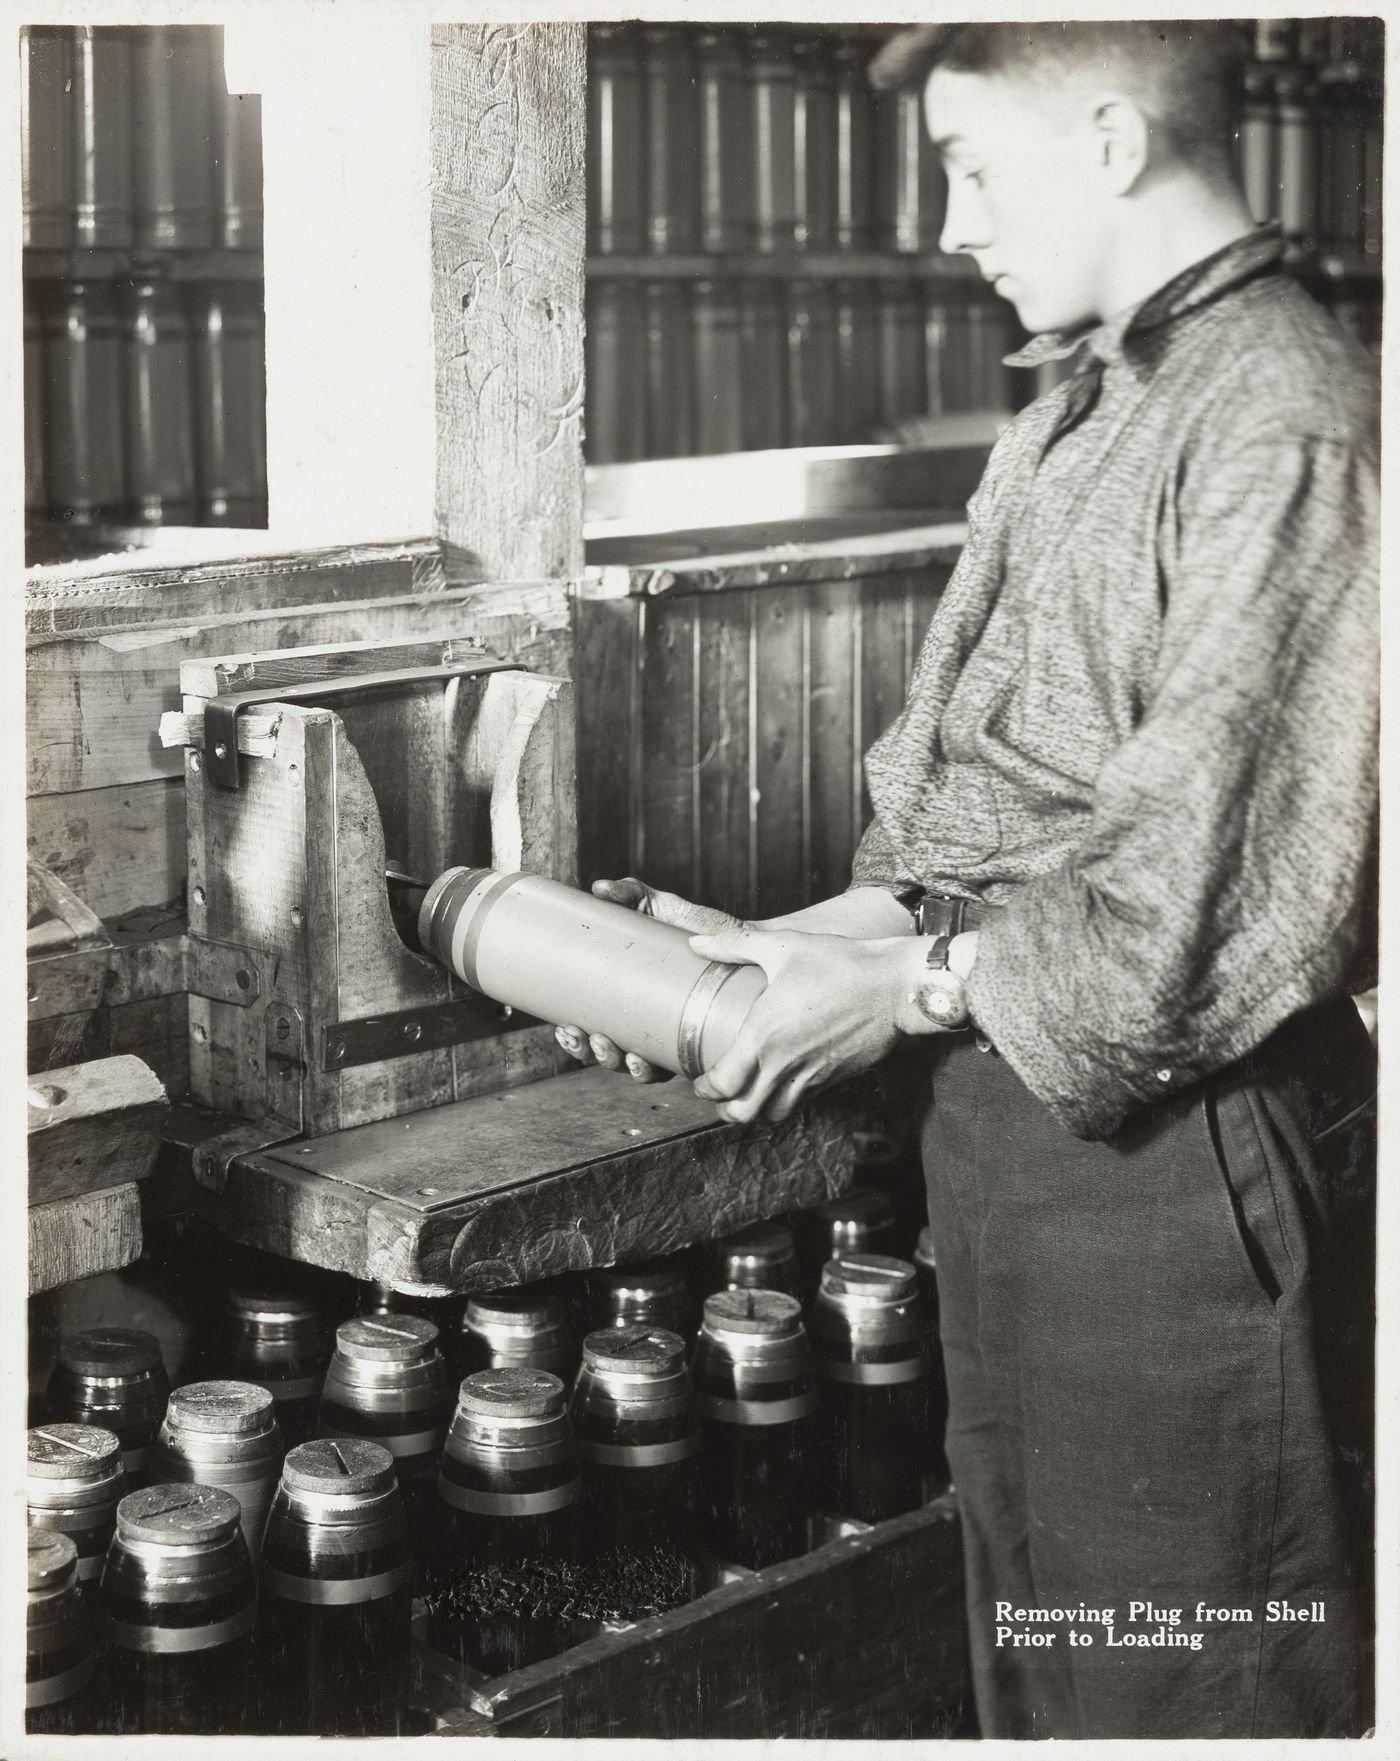 Interior view of worker removing plug from shell prior to loading at the Energite Explosives Plant No. 3, the Shell Loading Plant, Renfrew, Ontario, Canada